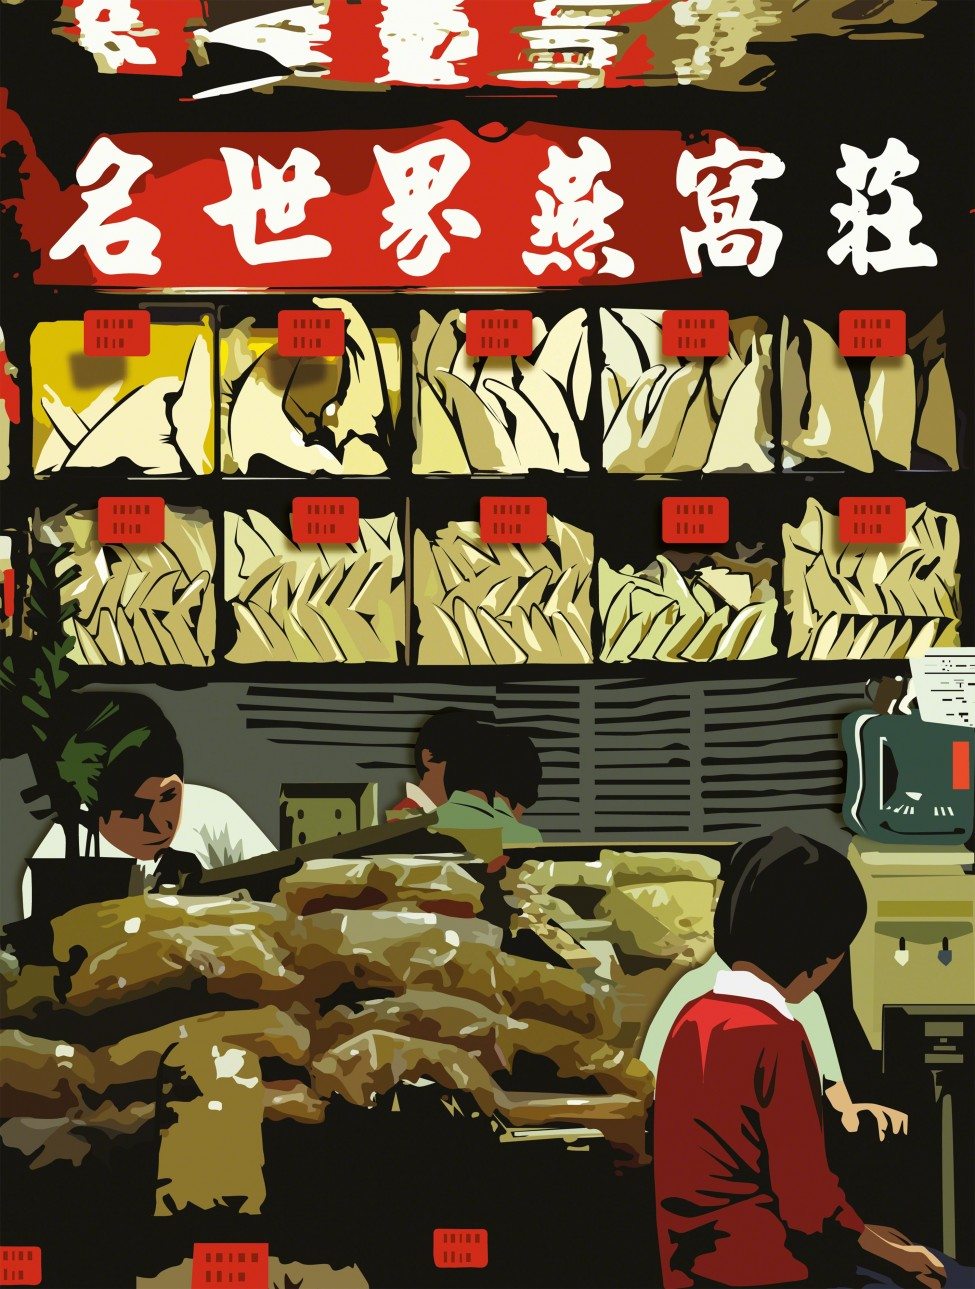 Shoppers at a market in Hong Kong do not lack for available dried shark fin.<br />
Photo by Thomas P. Peschak | Artwork by Alessandro Bonora